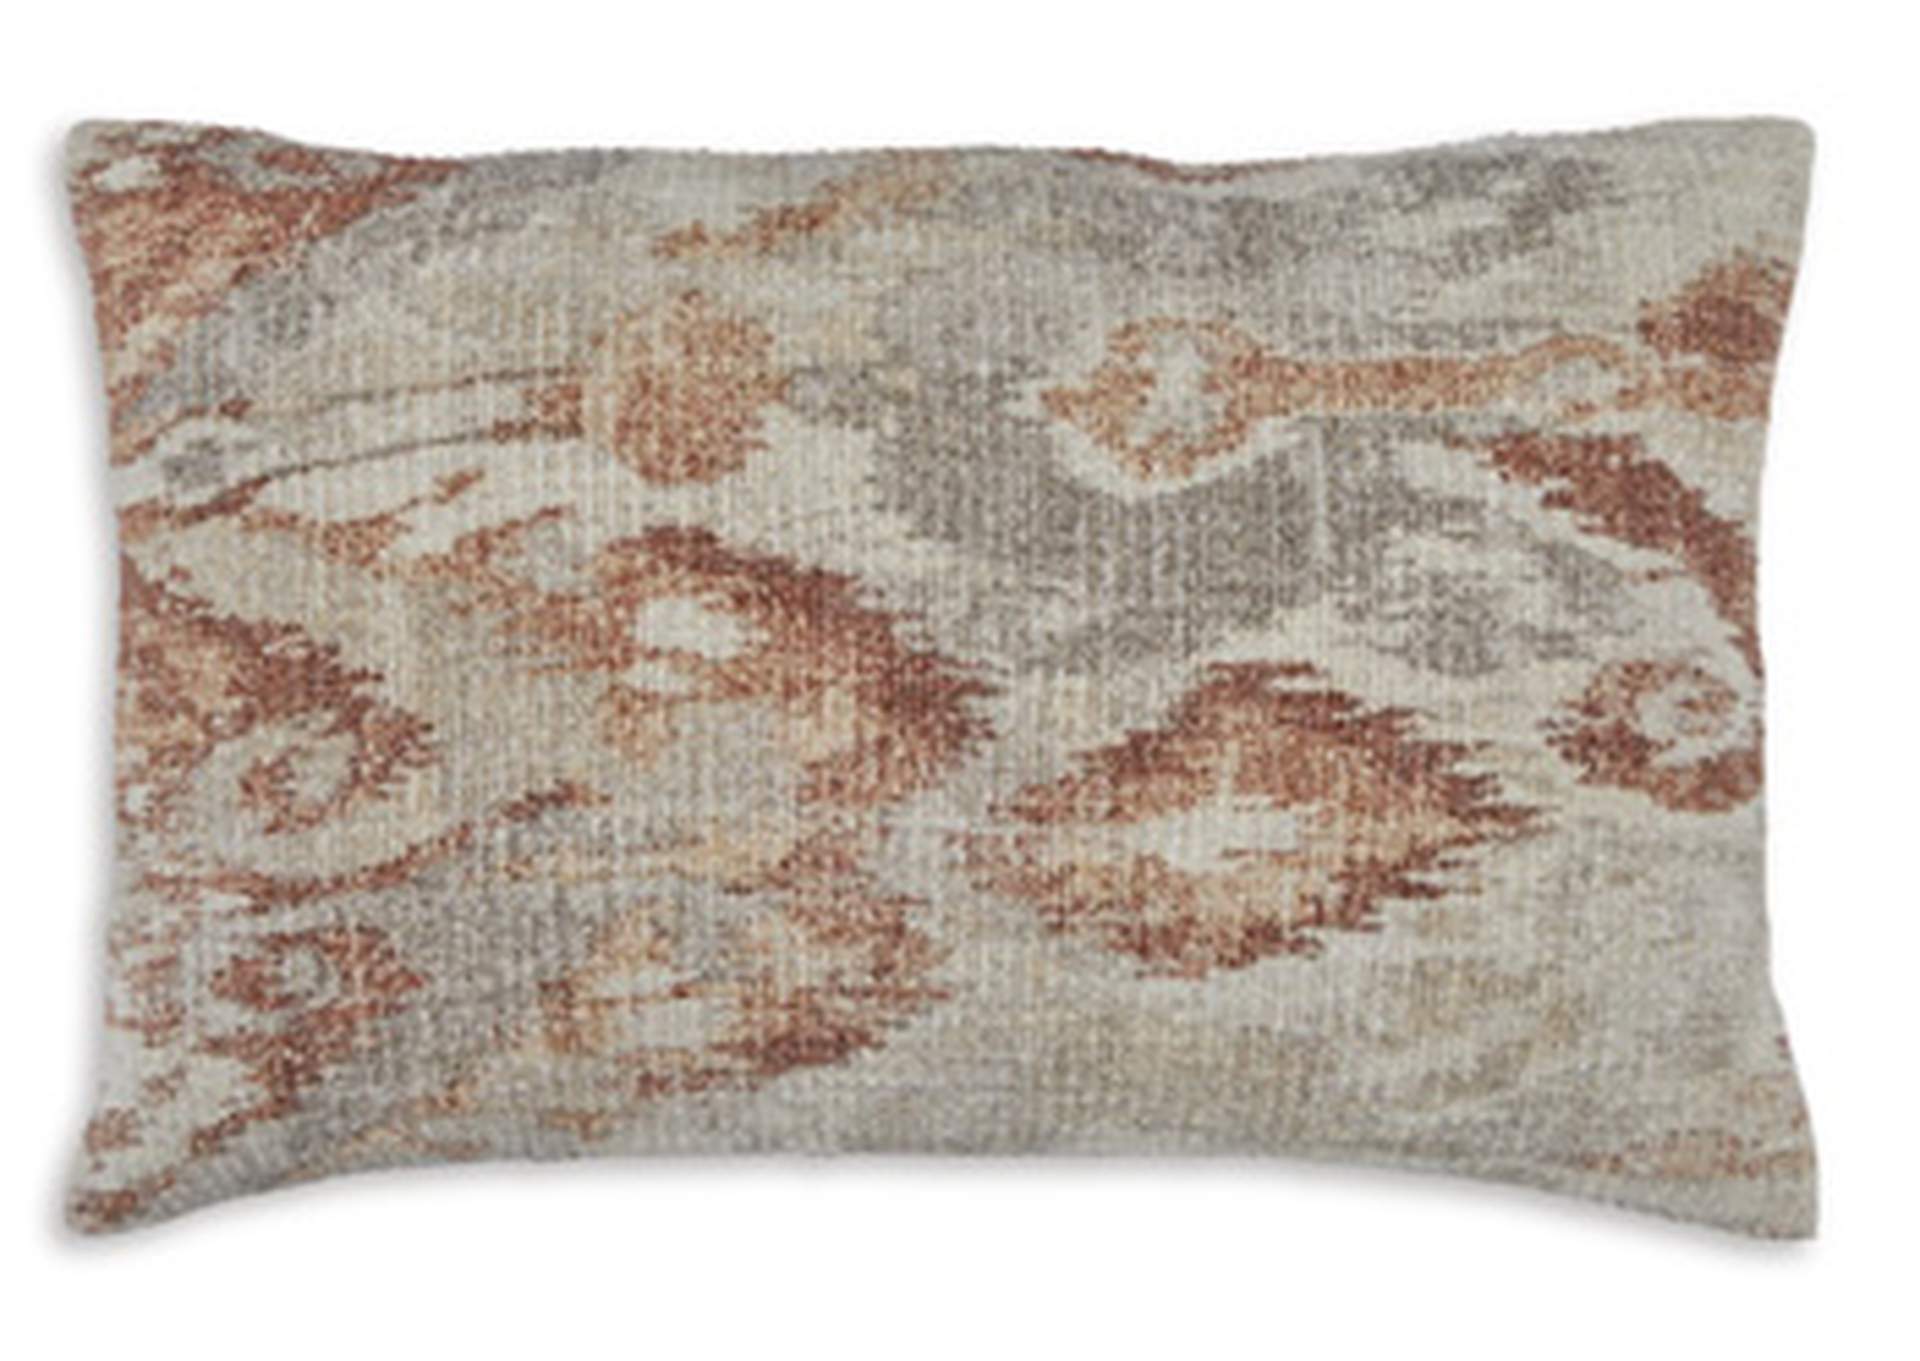 Aprover Pillow,Signature Design By Ashley